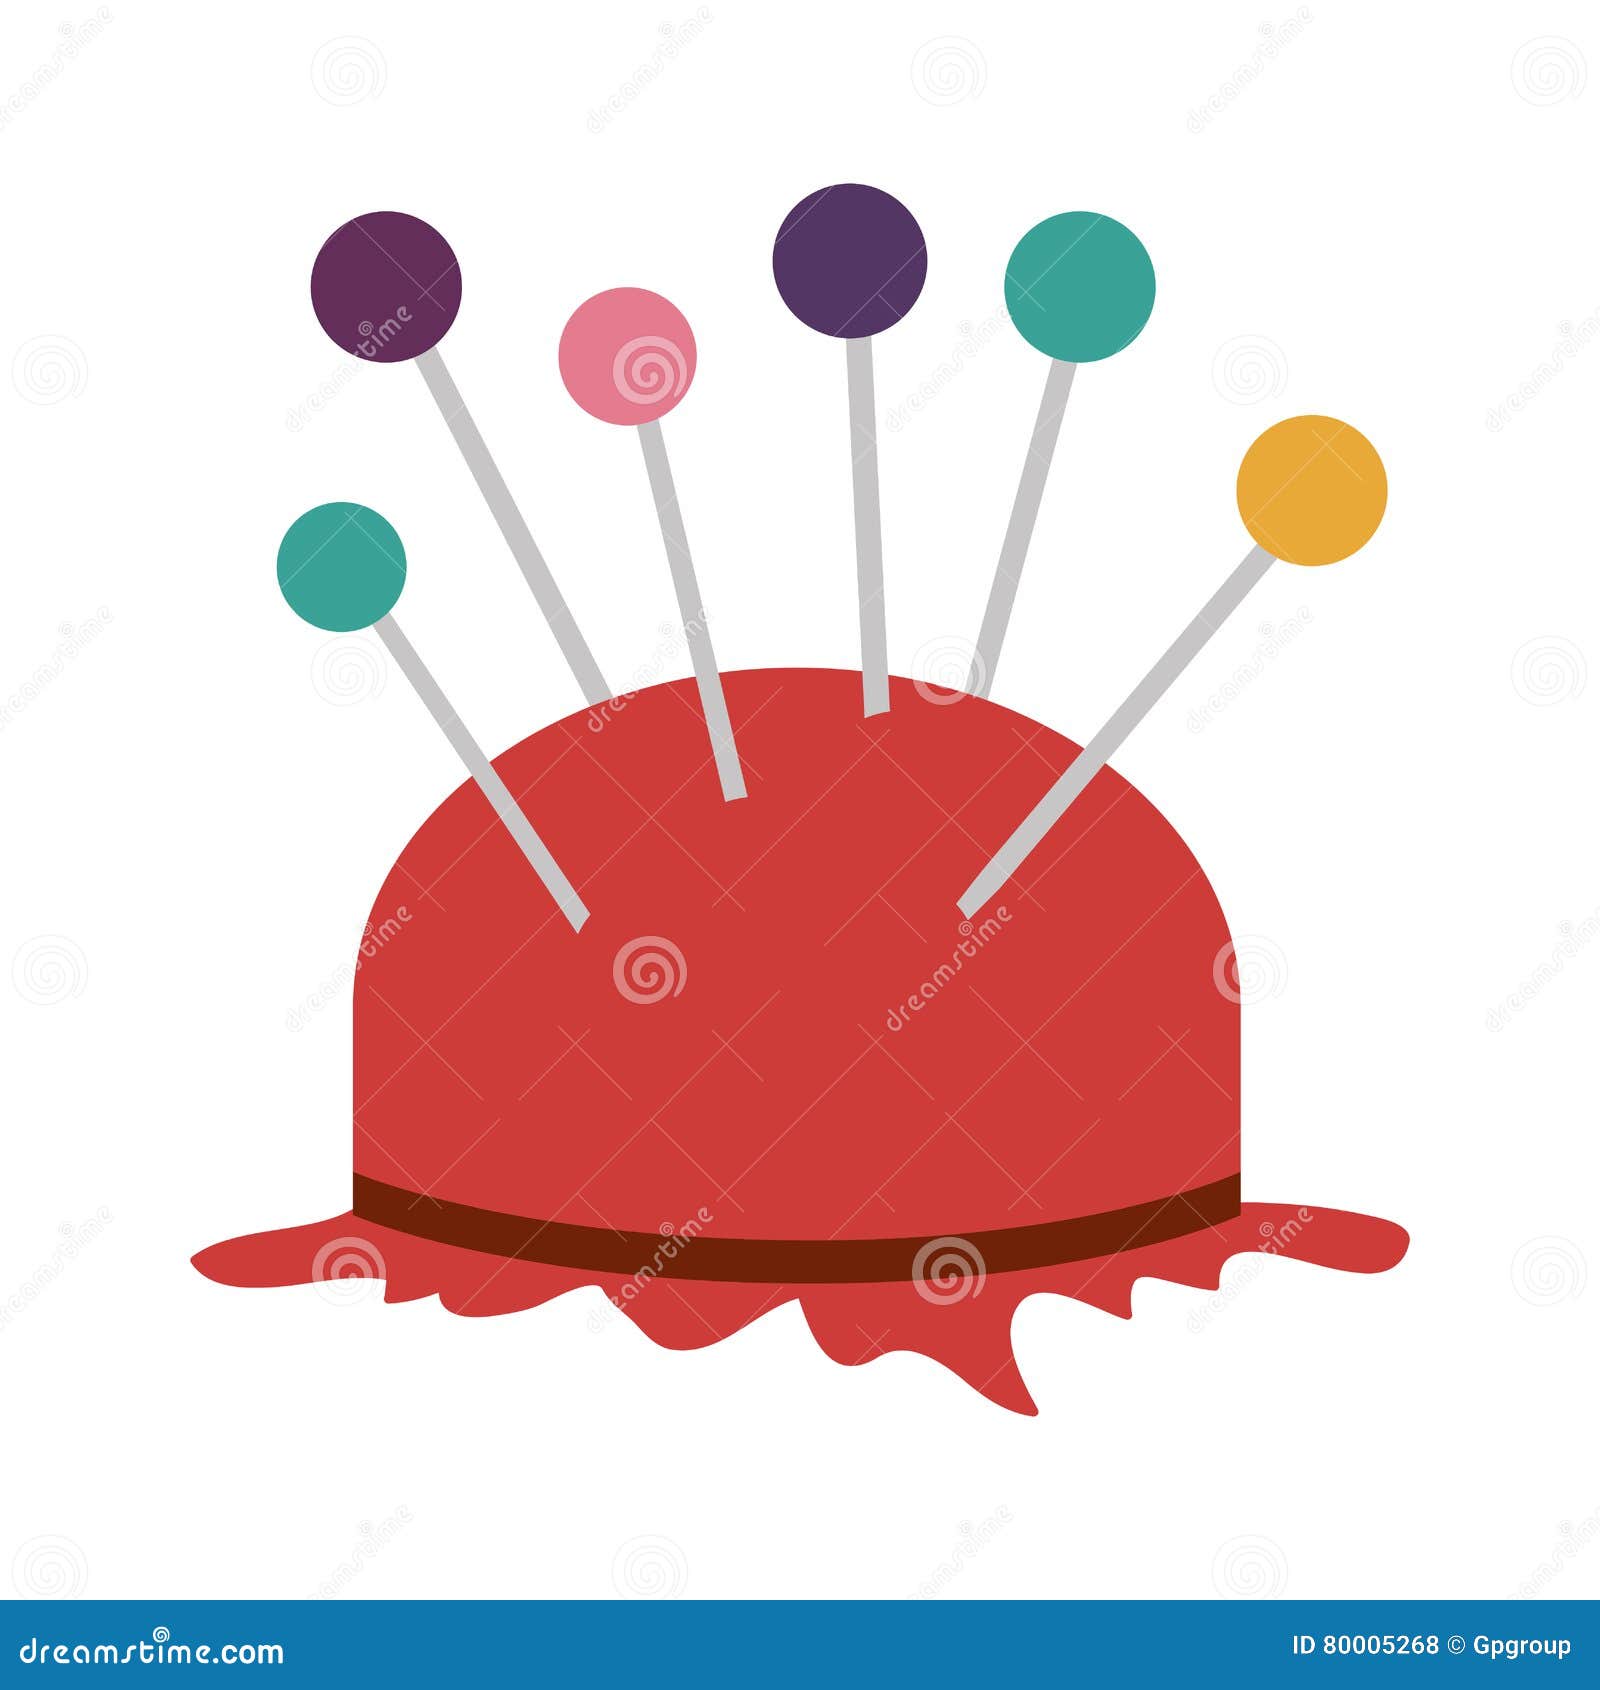 Pincushion with pins icon stock vector. Illustration of repair - 80005268